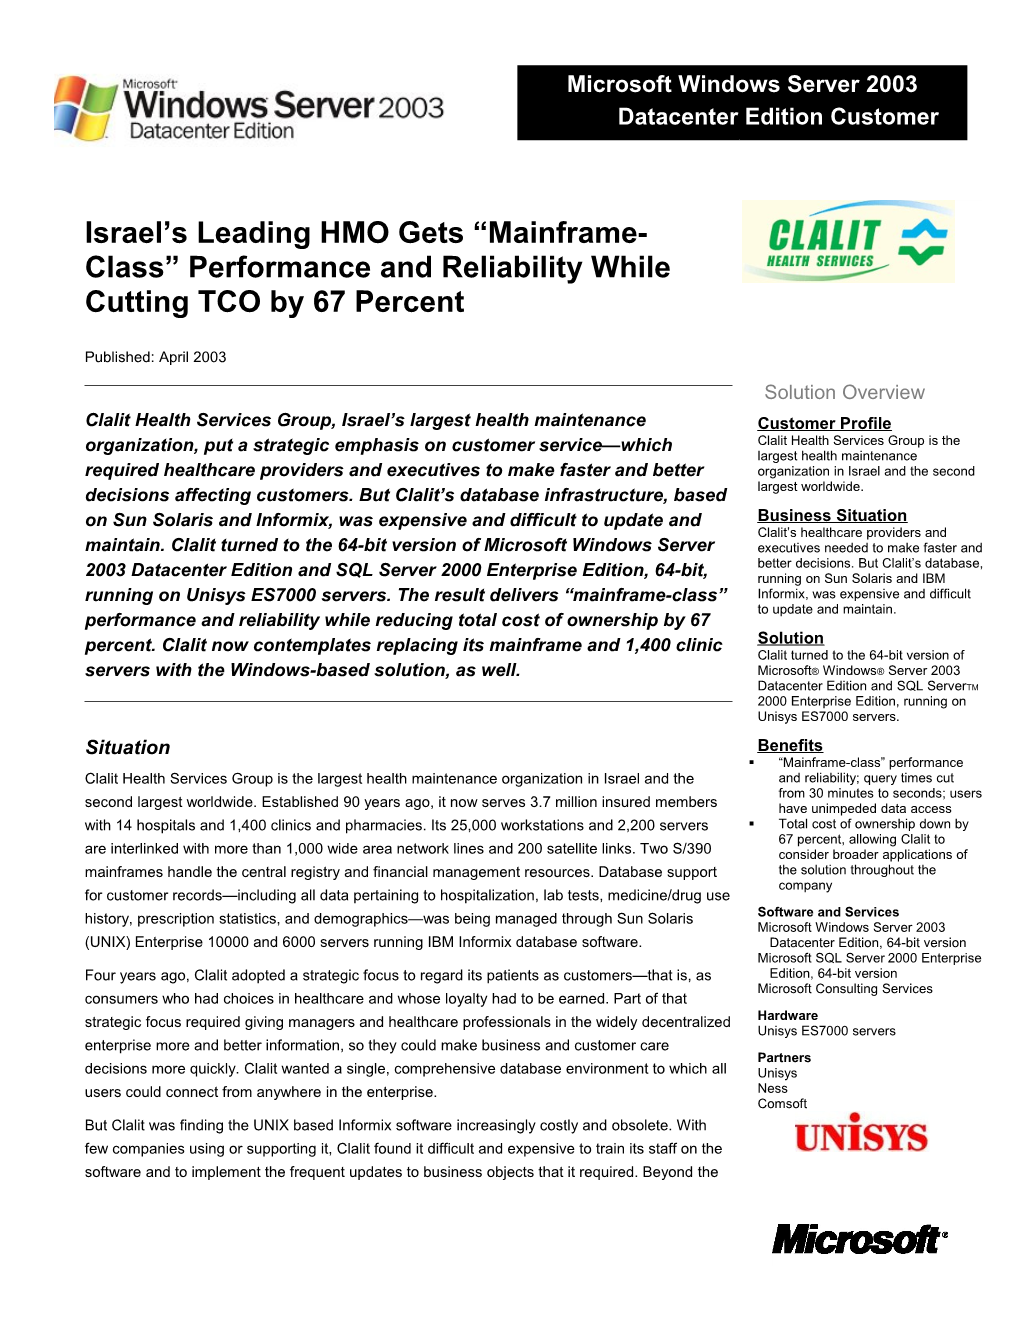 Israel S Leading HMO Gets Mainframe-Class Performance and Reliability While Cutting TCO